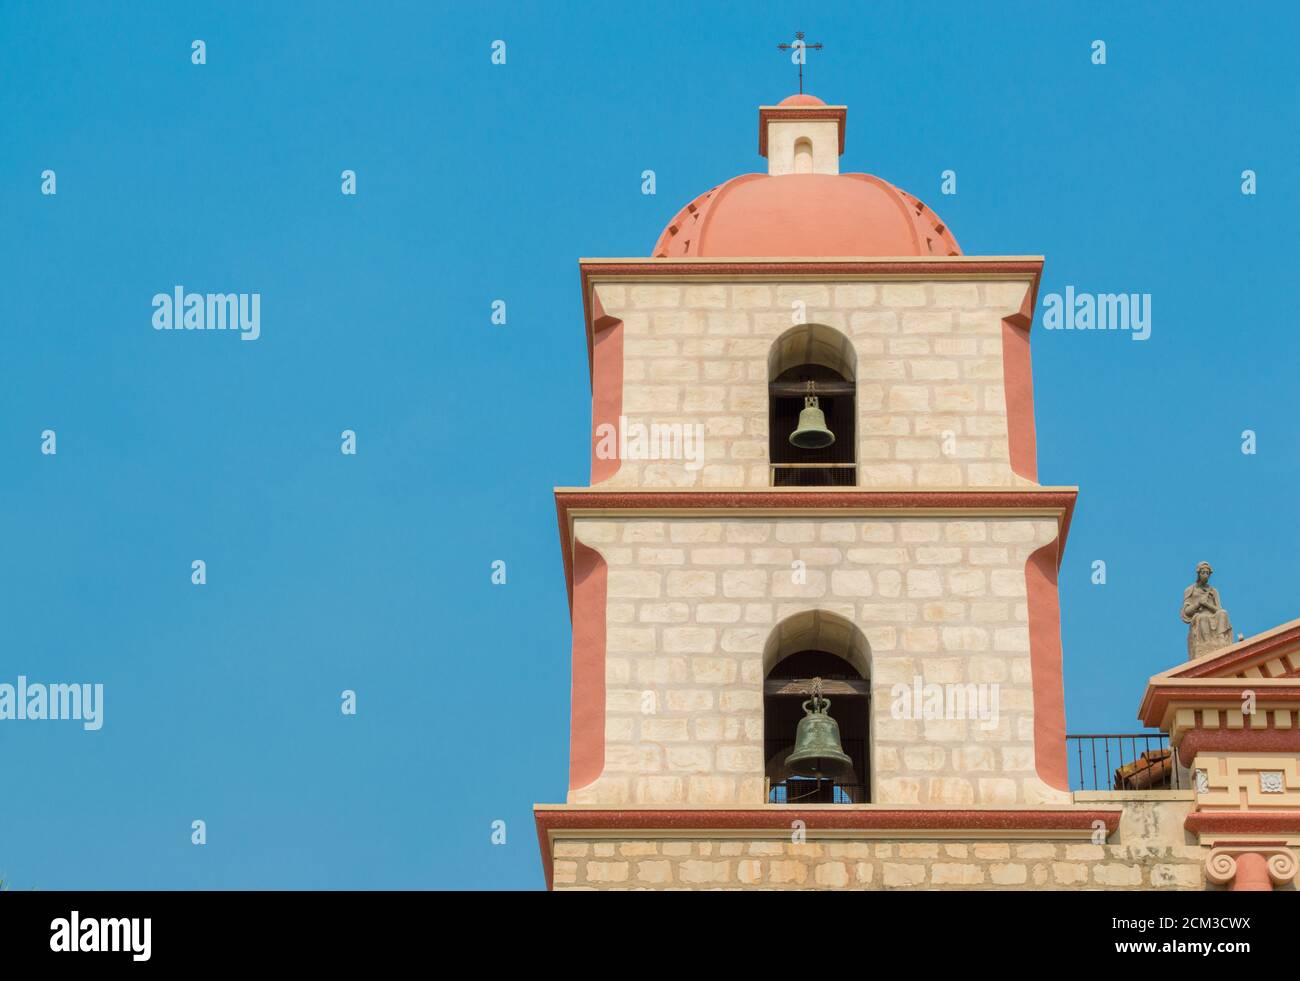 Spanish style bell tower at the historic Santa Barbara Mission in California under bright blue sky with copy space Stock Photo